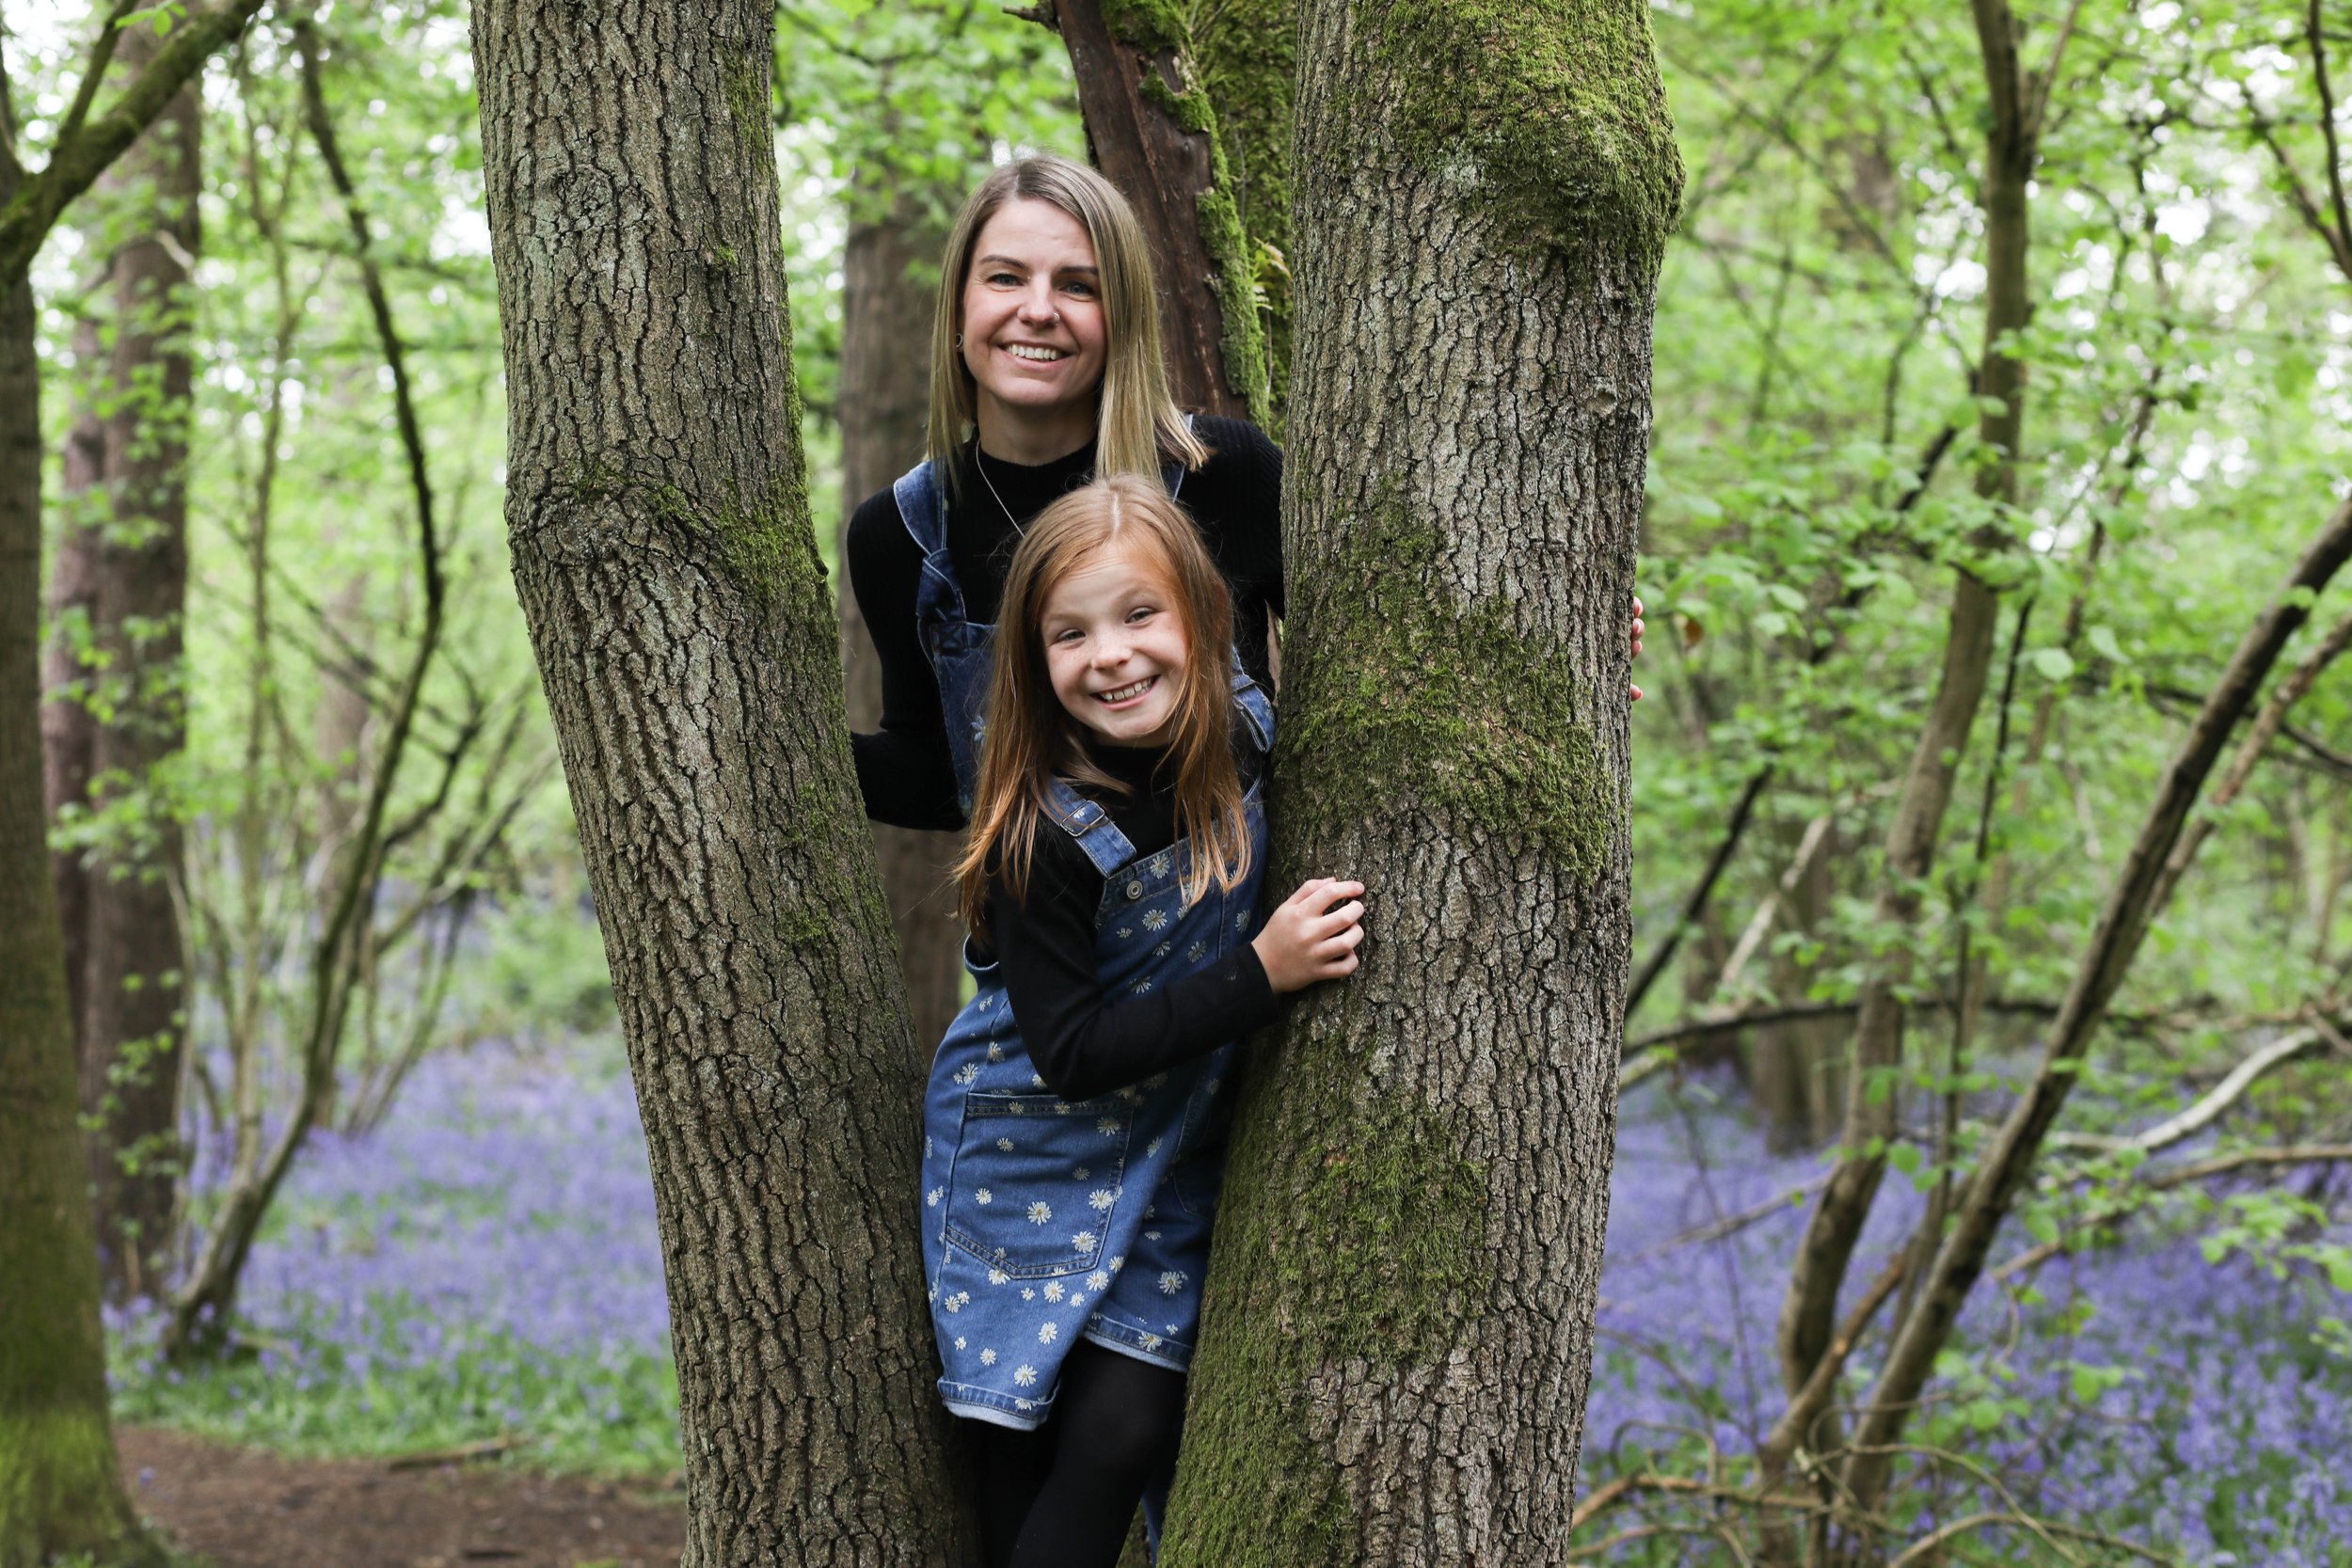 MUM AND DAUGHTER PHOTO SHOOT IN THE BLUEBELLS | BERKSHIRE PORTRAIT SHOOTS47 choice .JPG